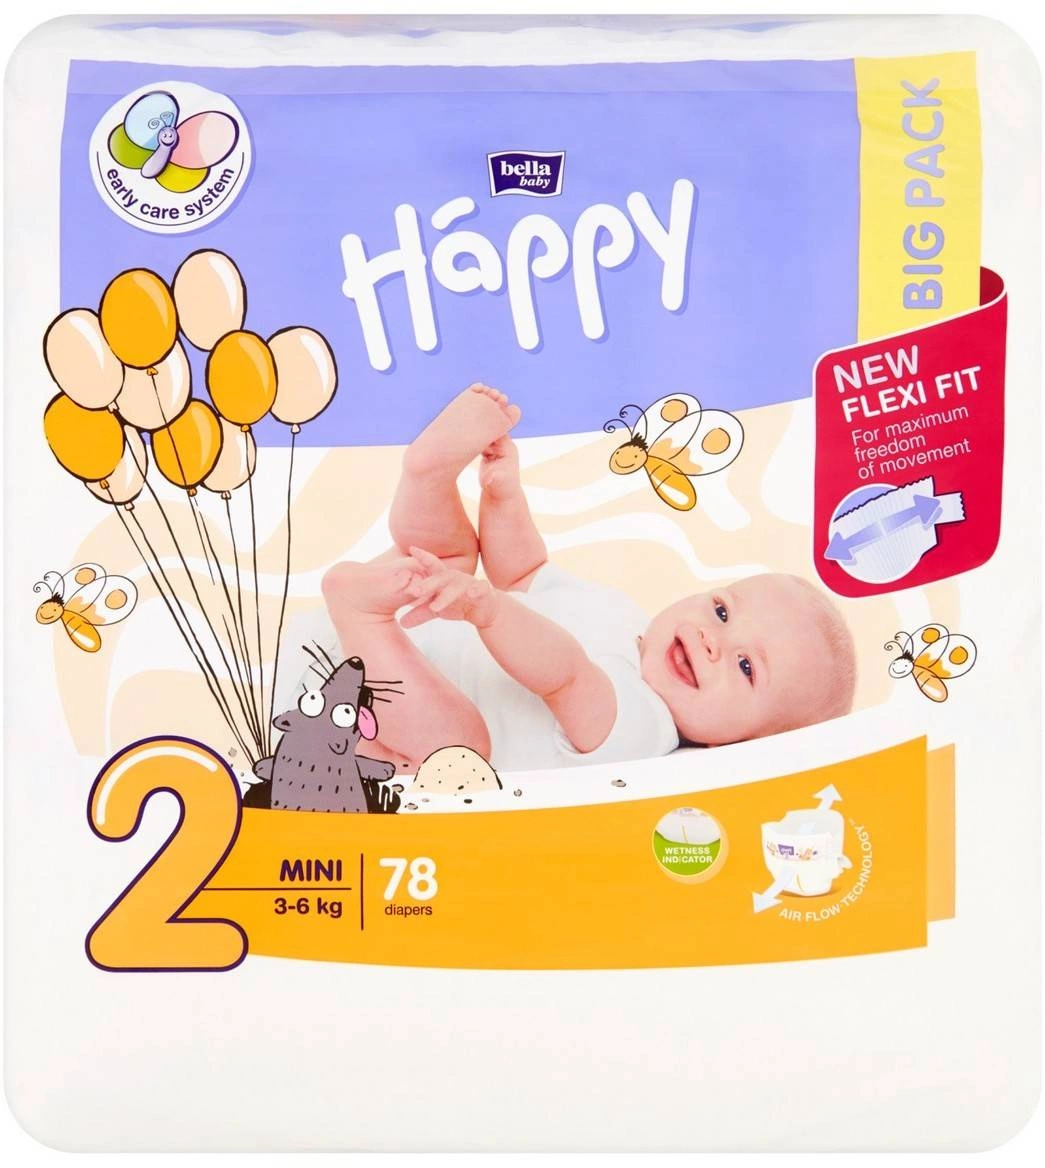 pampers pants giant box